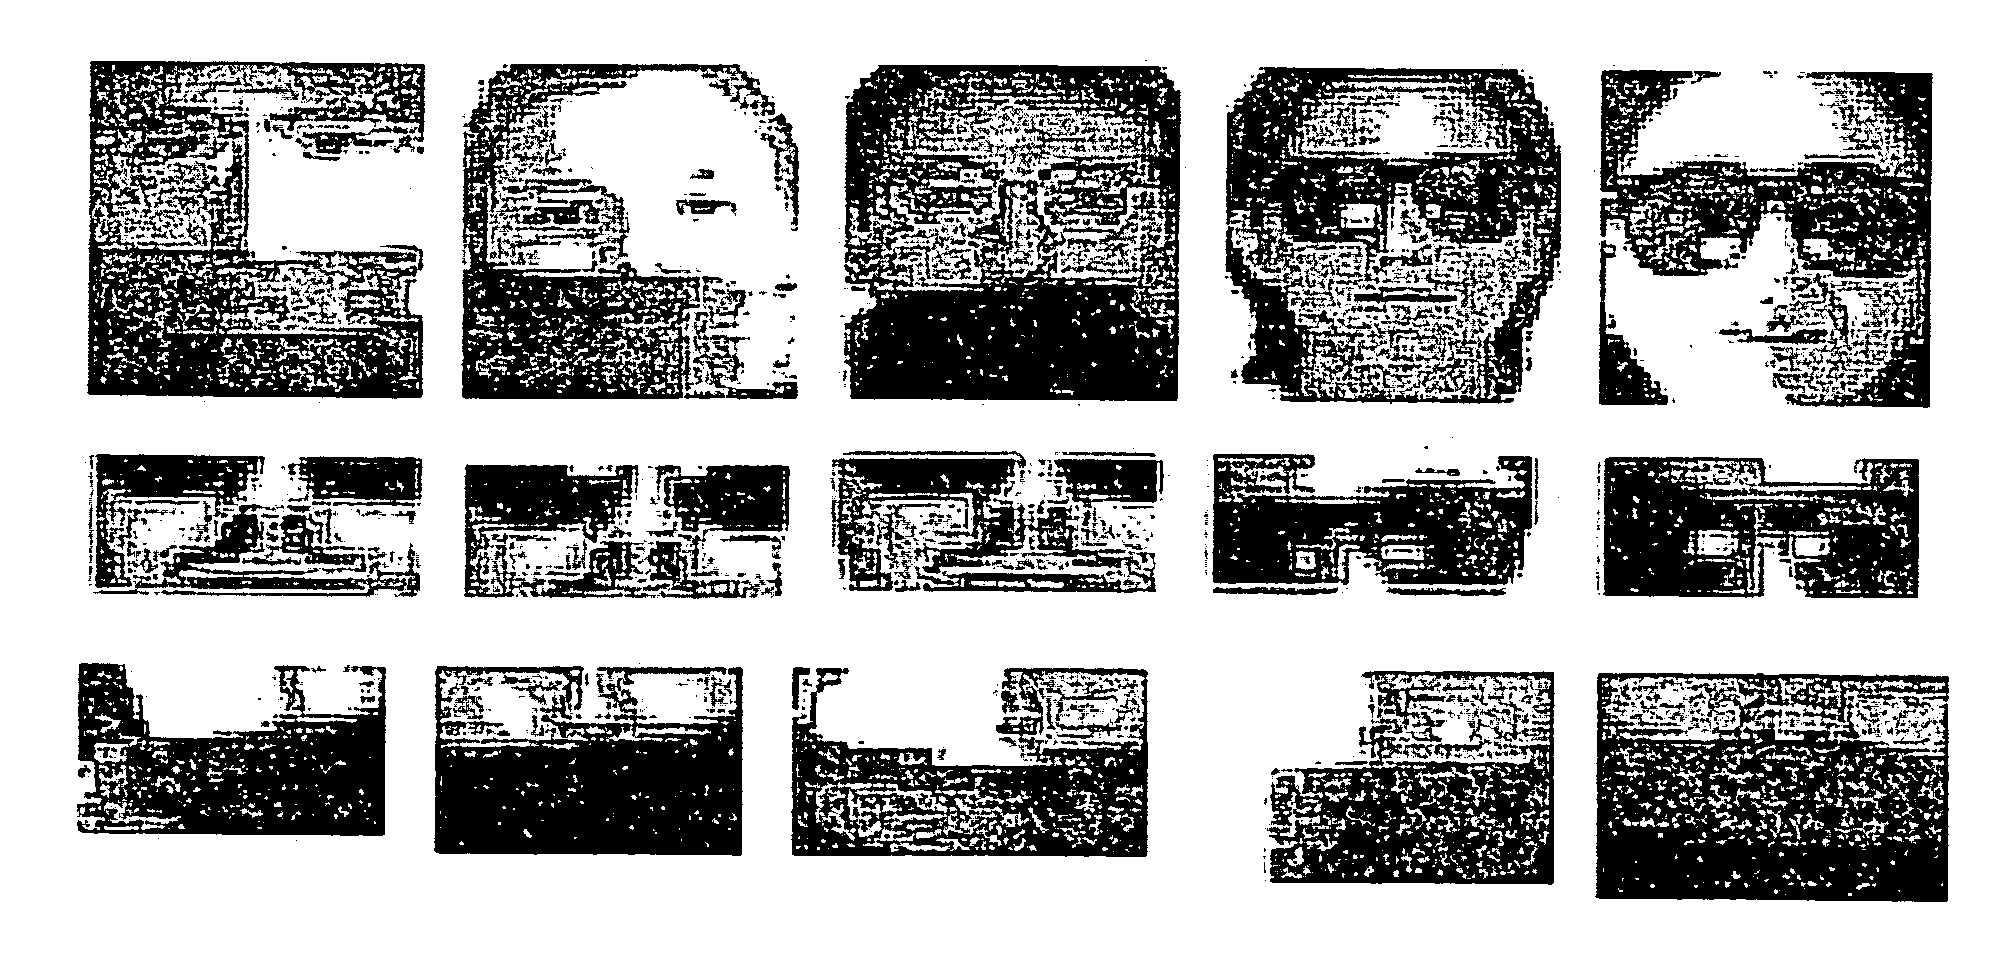 System and method for detecting face